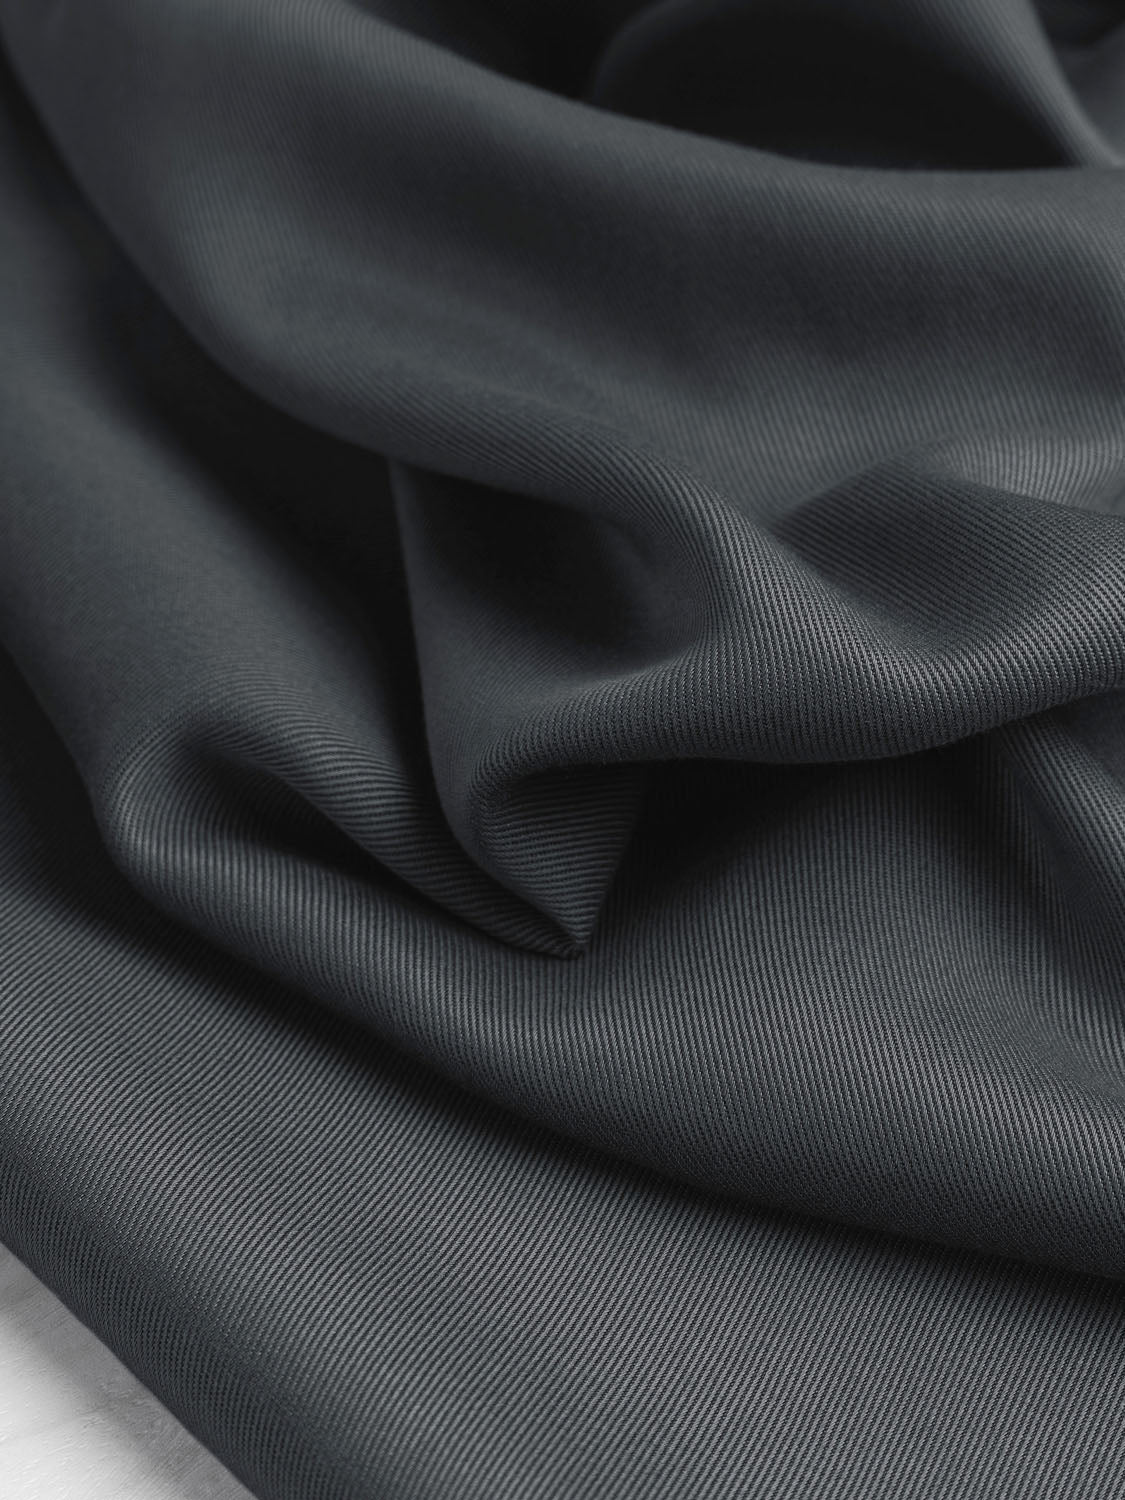 Polyester Viscose Stretch Crepe - Charcoal